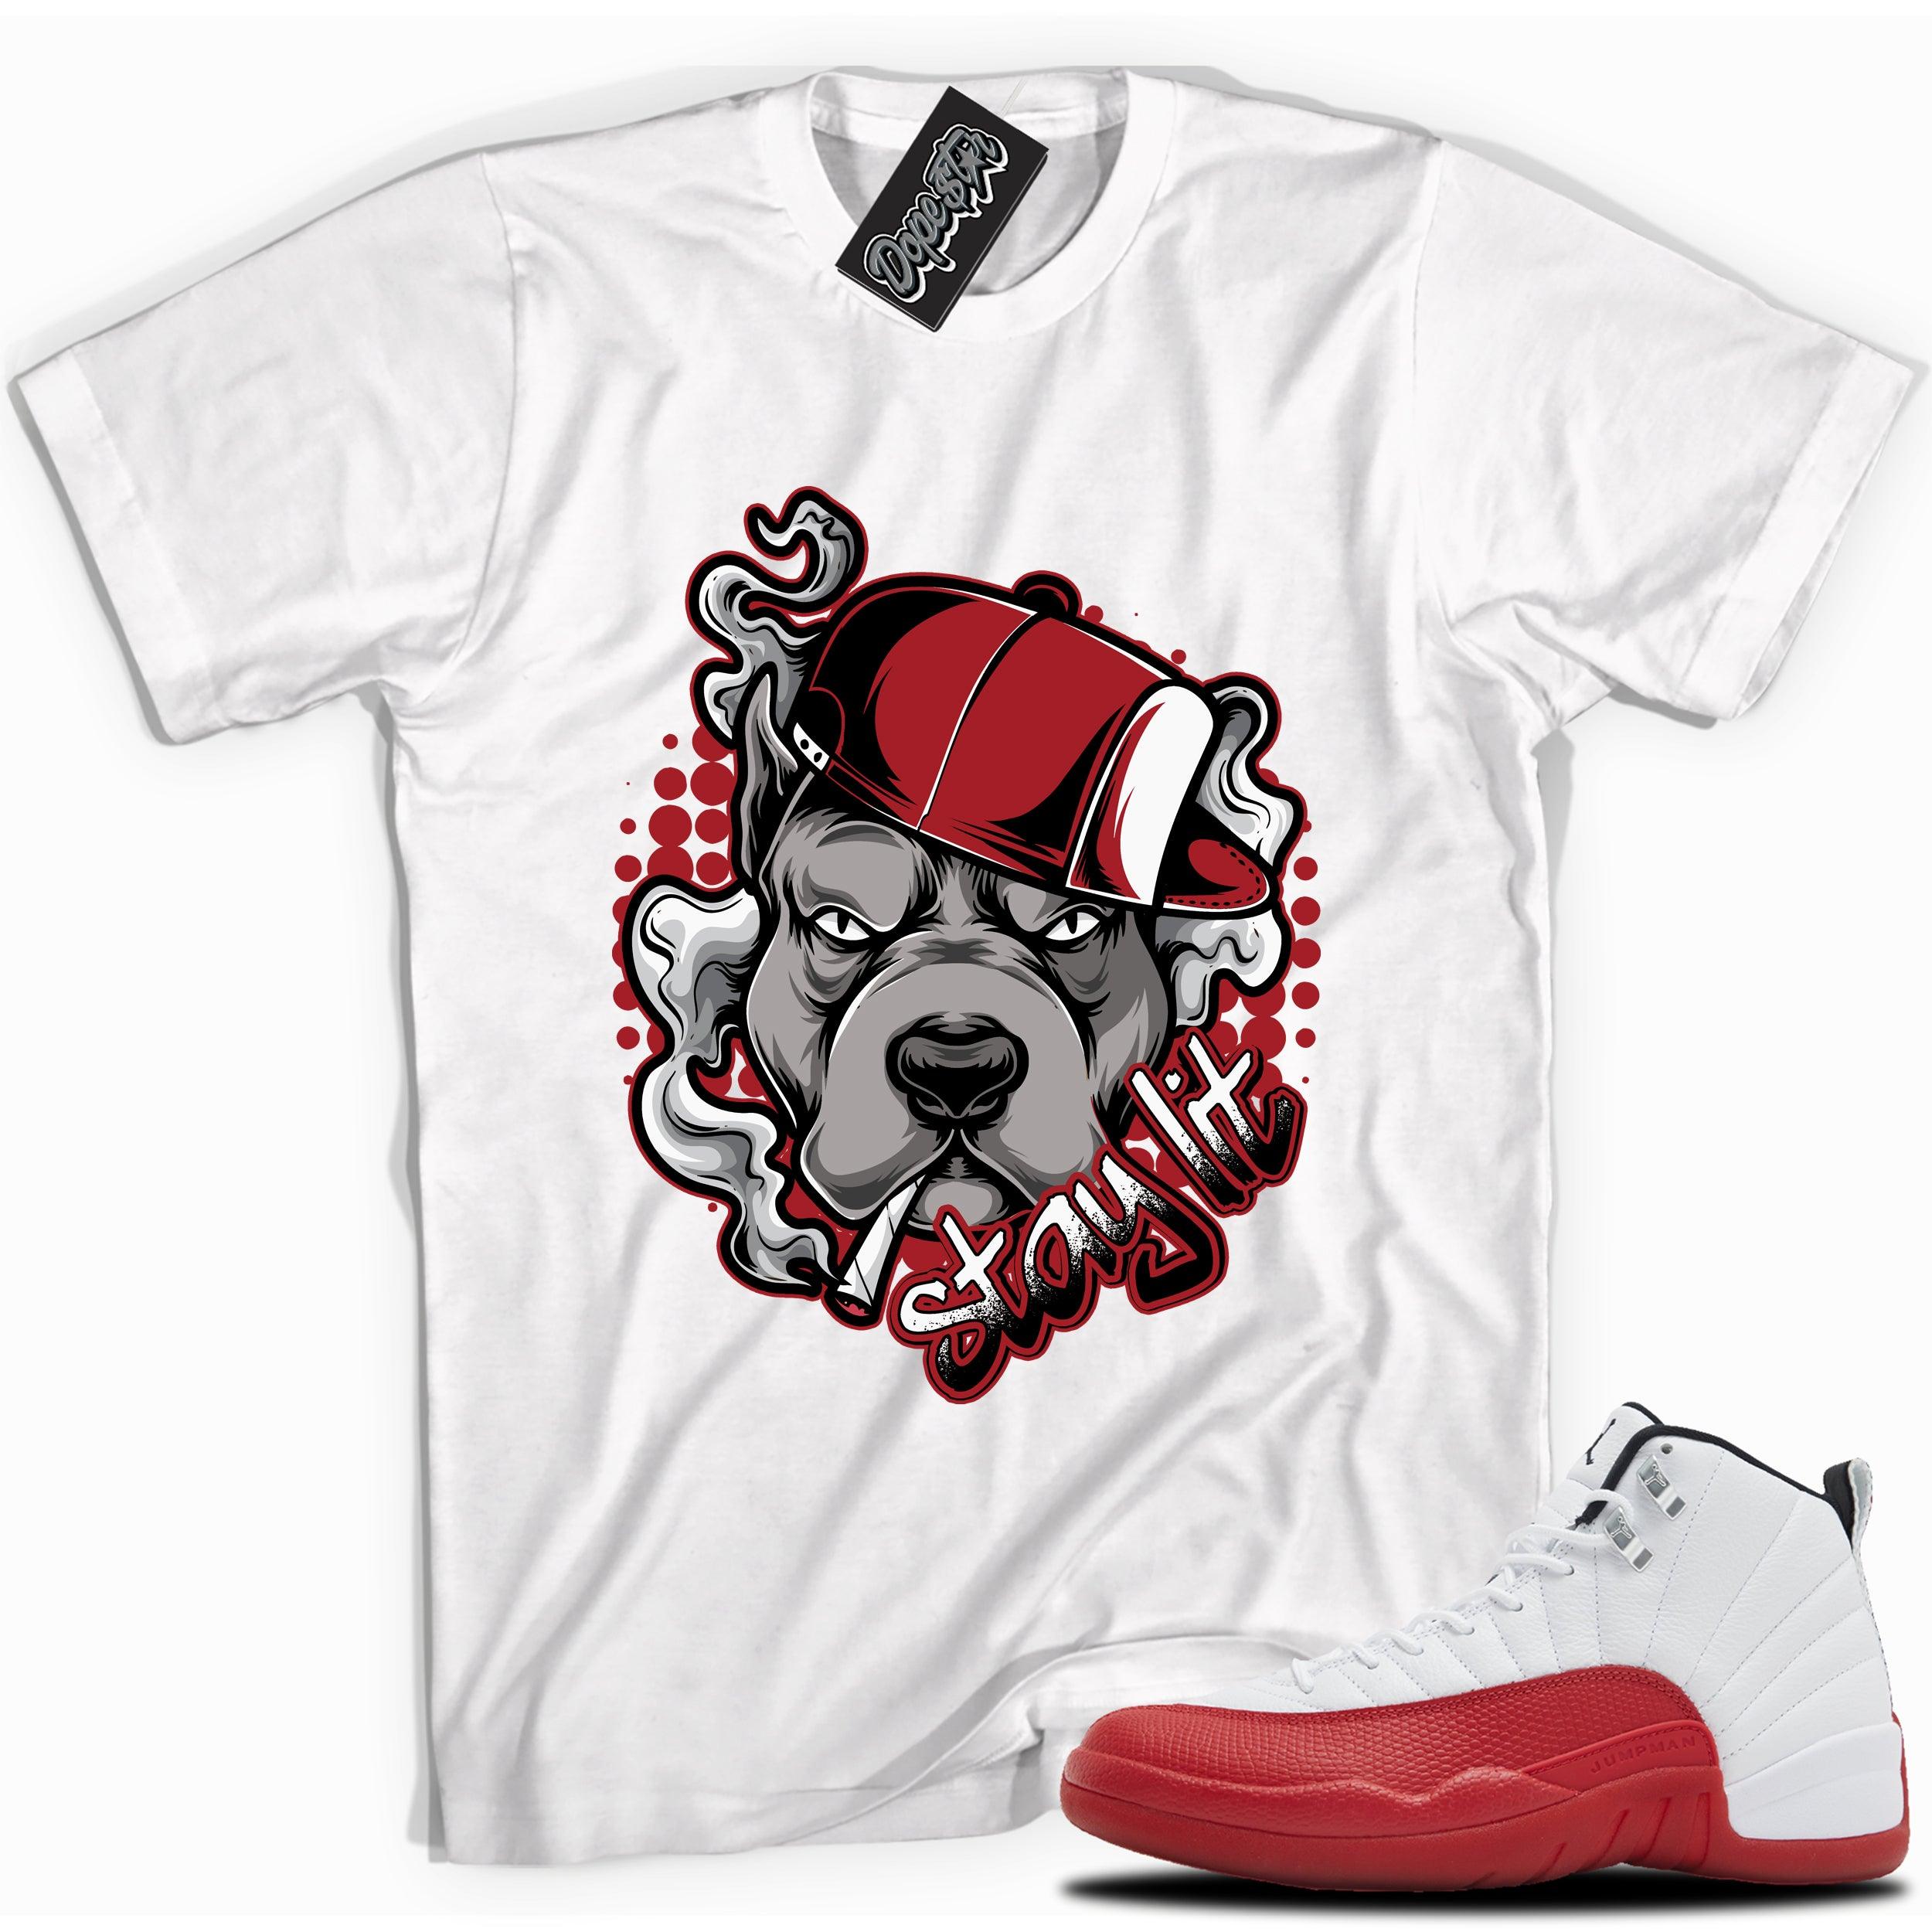 Cool White graphic tee with “STAY LIT” print, that perfectly matches Air Jordan 12 Retro Cherry Red 2023 red and white sneakers 